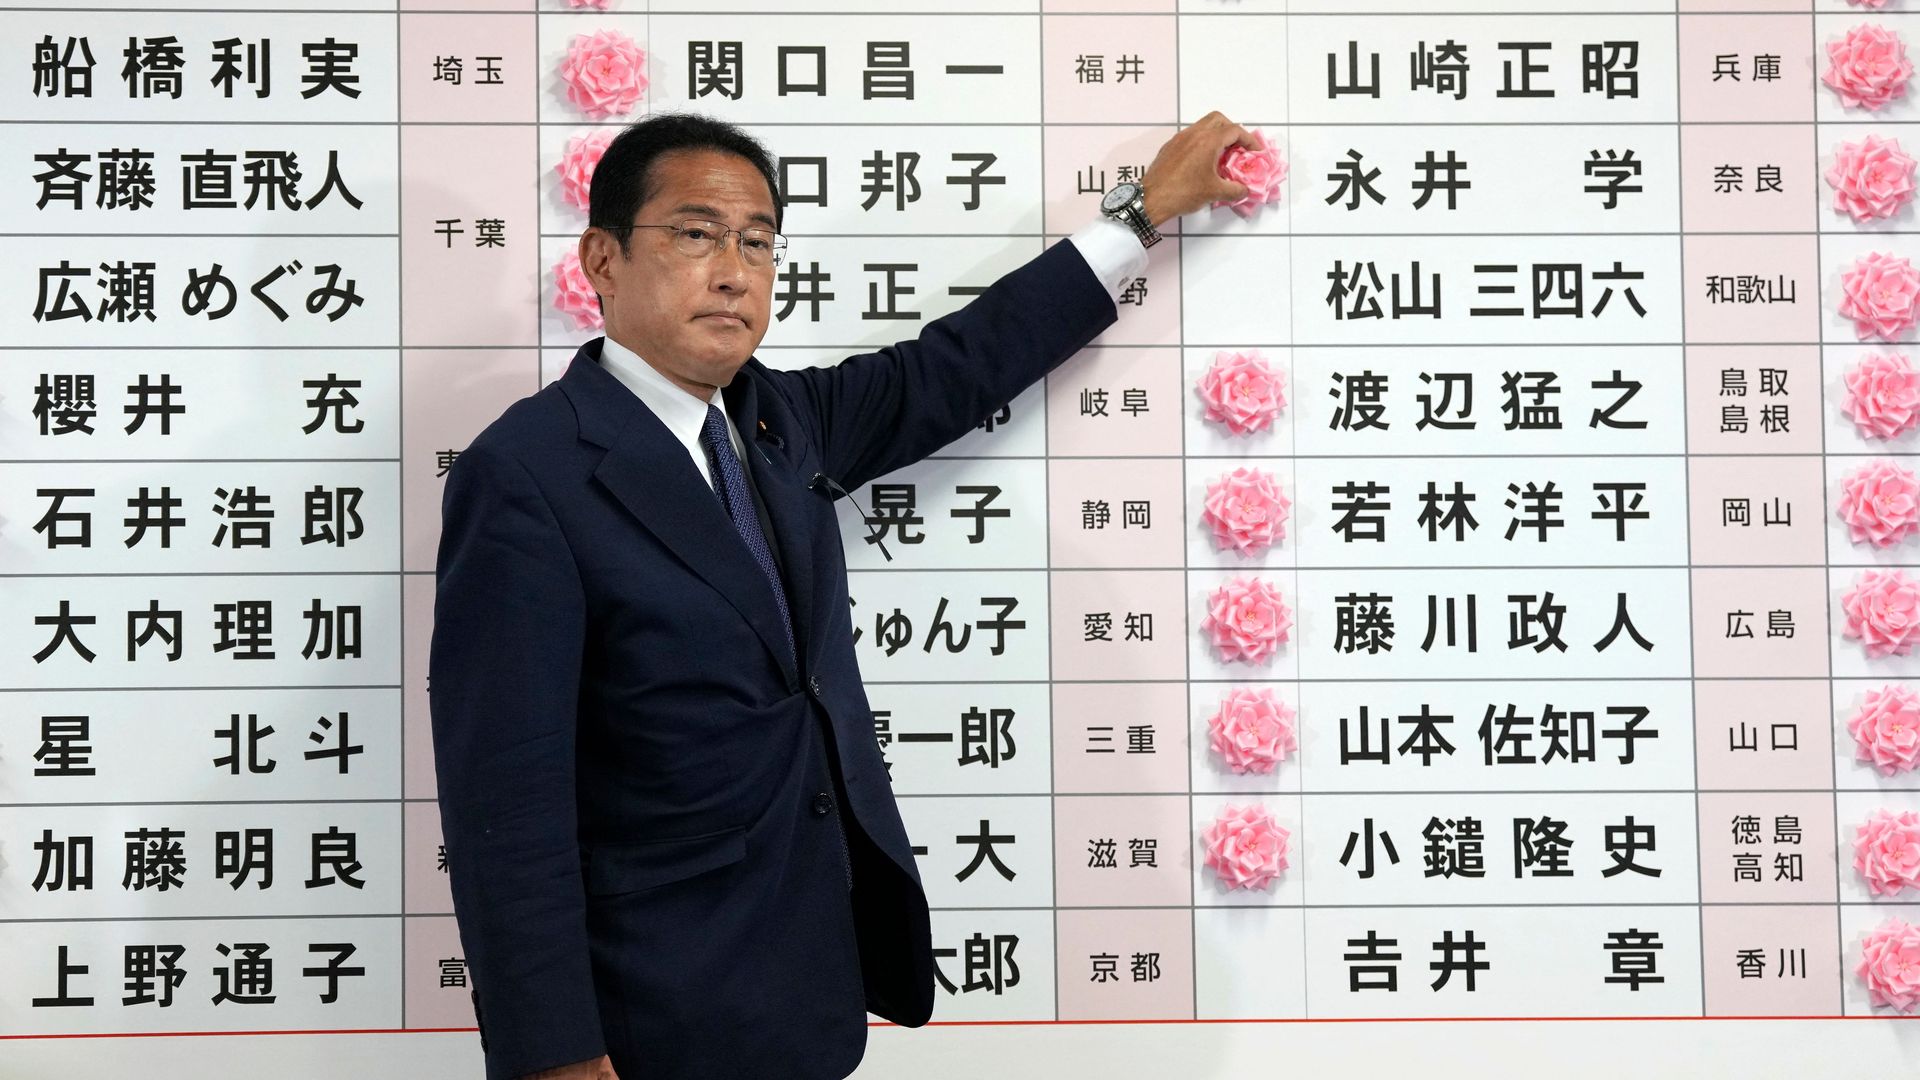 Japan's Prime Minister and the President of the Liberal Democratic Party (LDP) Fumio Kishida places a red paper rose on a LDP candidate's name to 